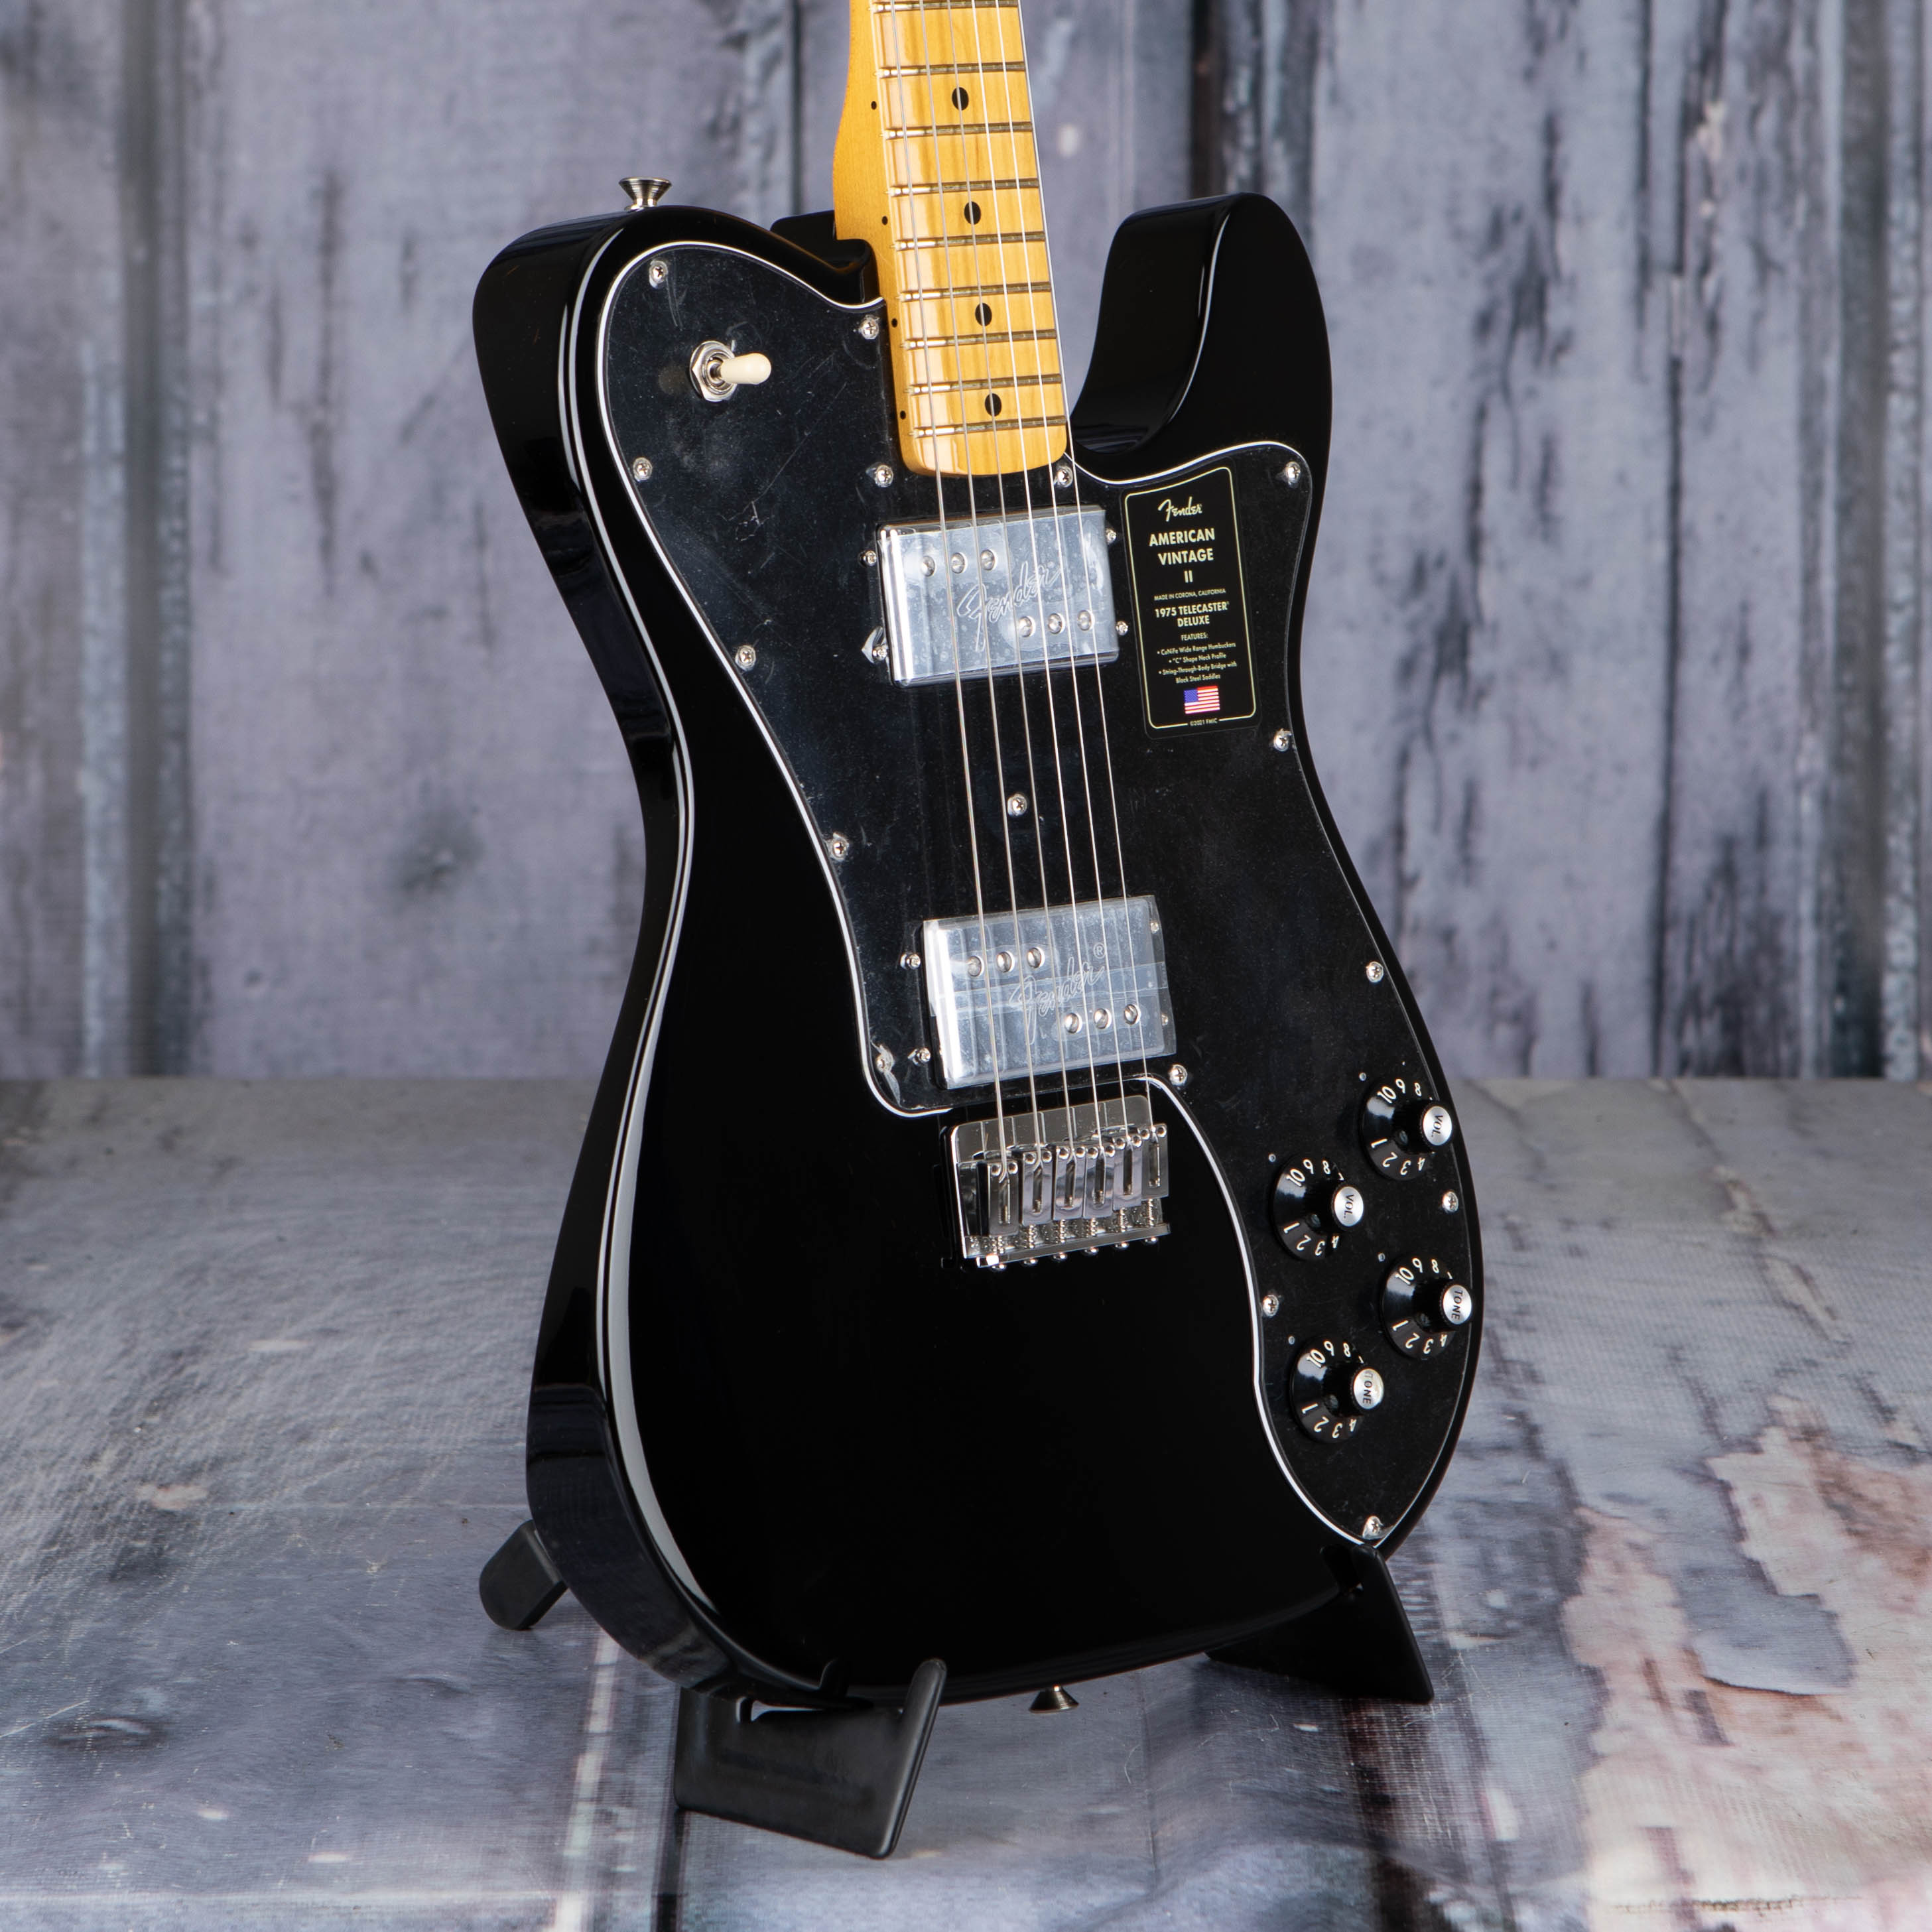 Fender American Vintage II 1975 Telecaster Deluxe Electric Guitar, Black, angle